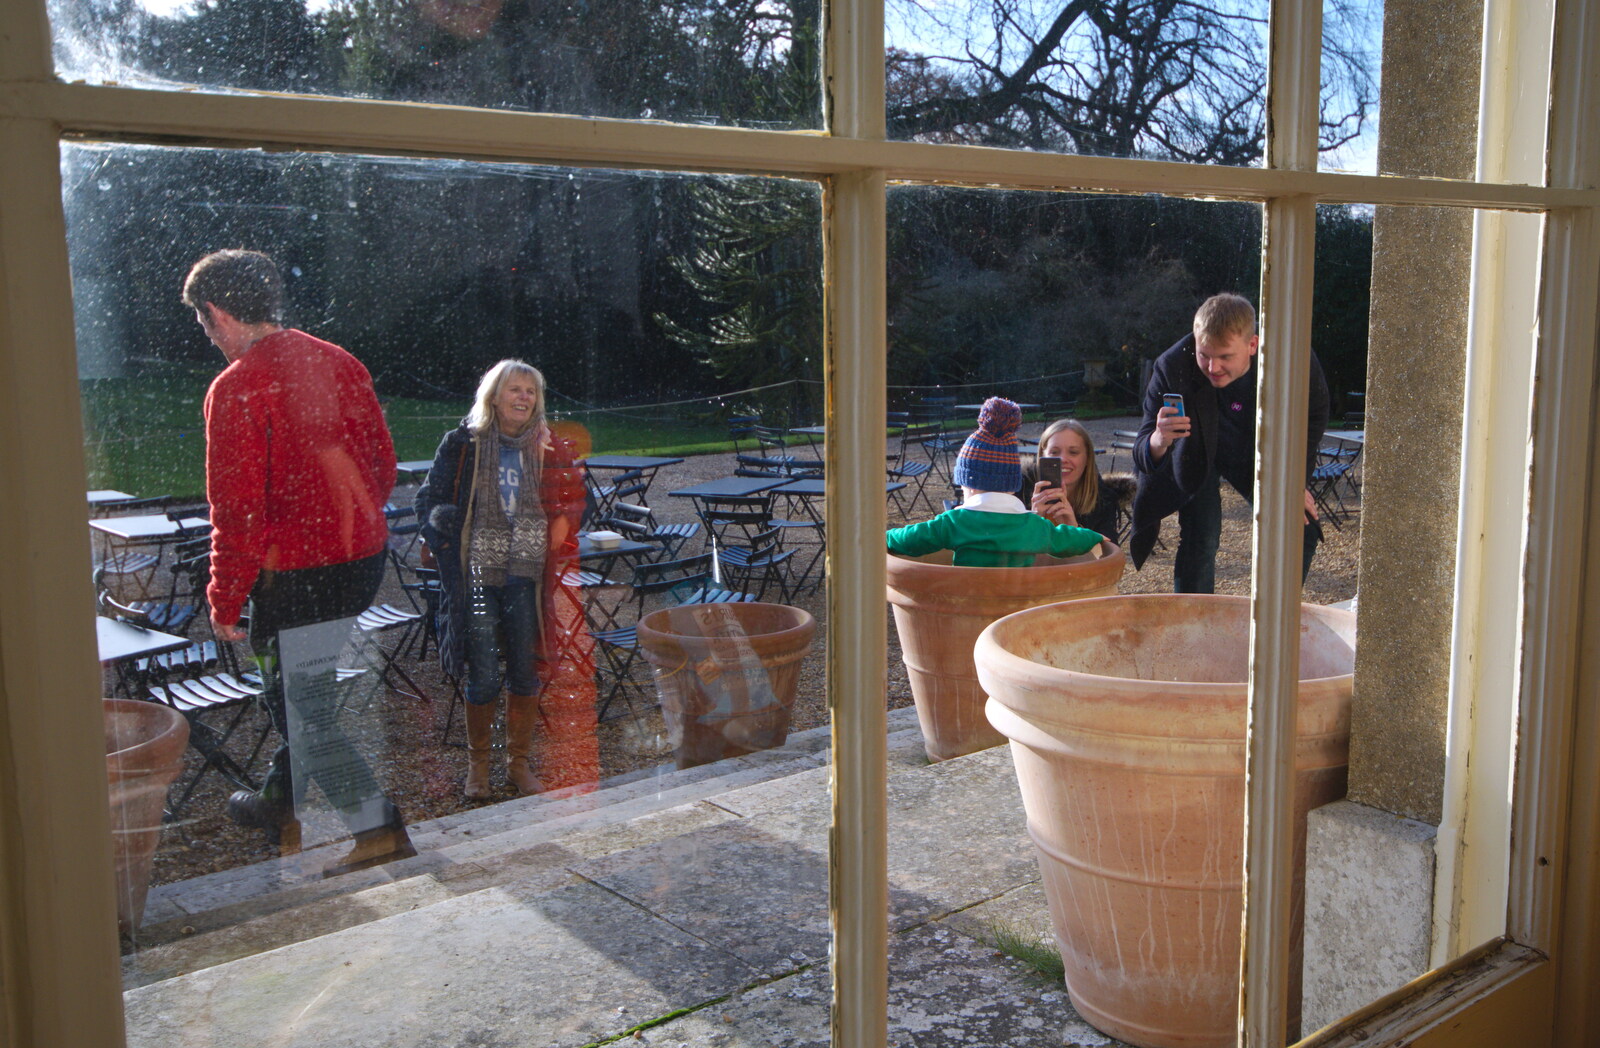 Outside, there's a cute baby in a plant pot from The Tiles of Ickworth House, Horringer, Suffolk - 30th November 2019